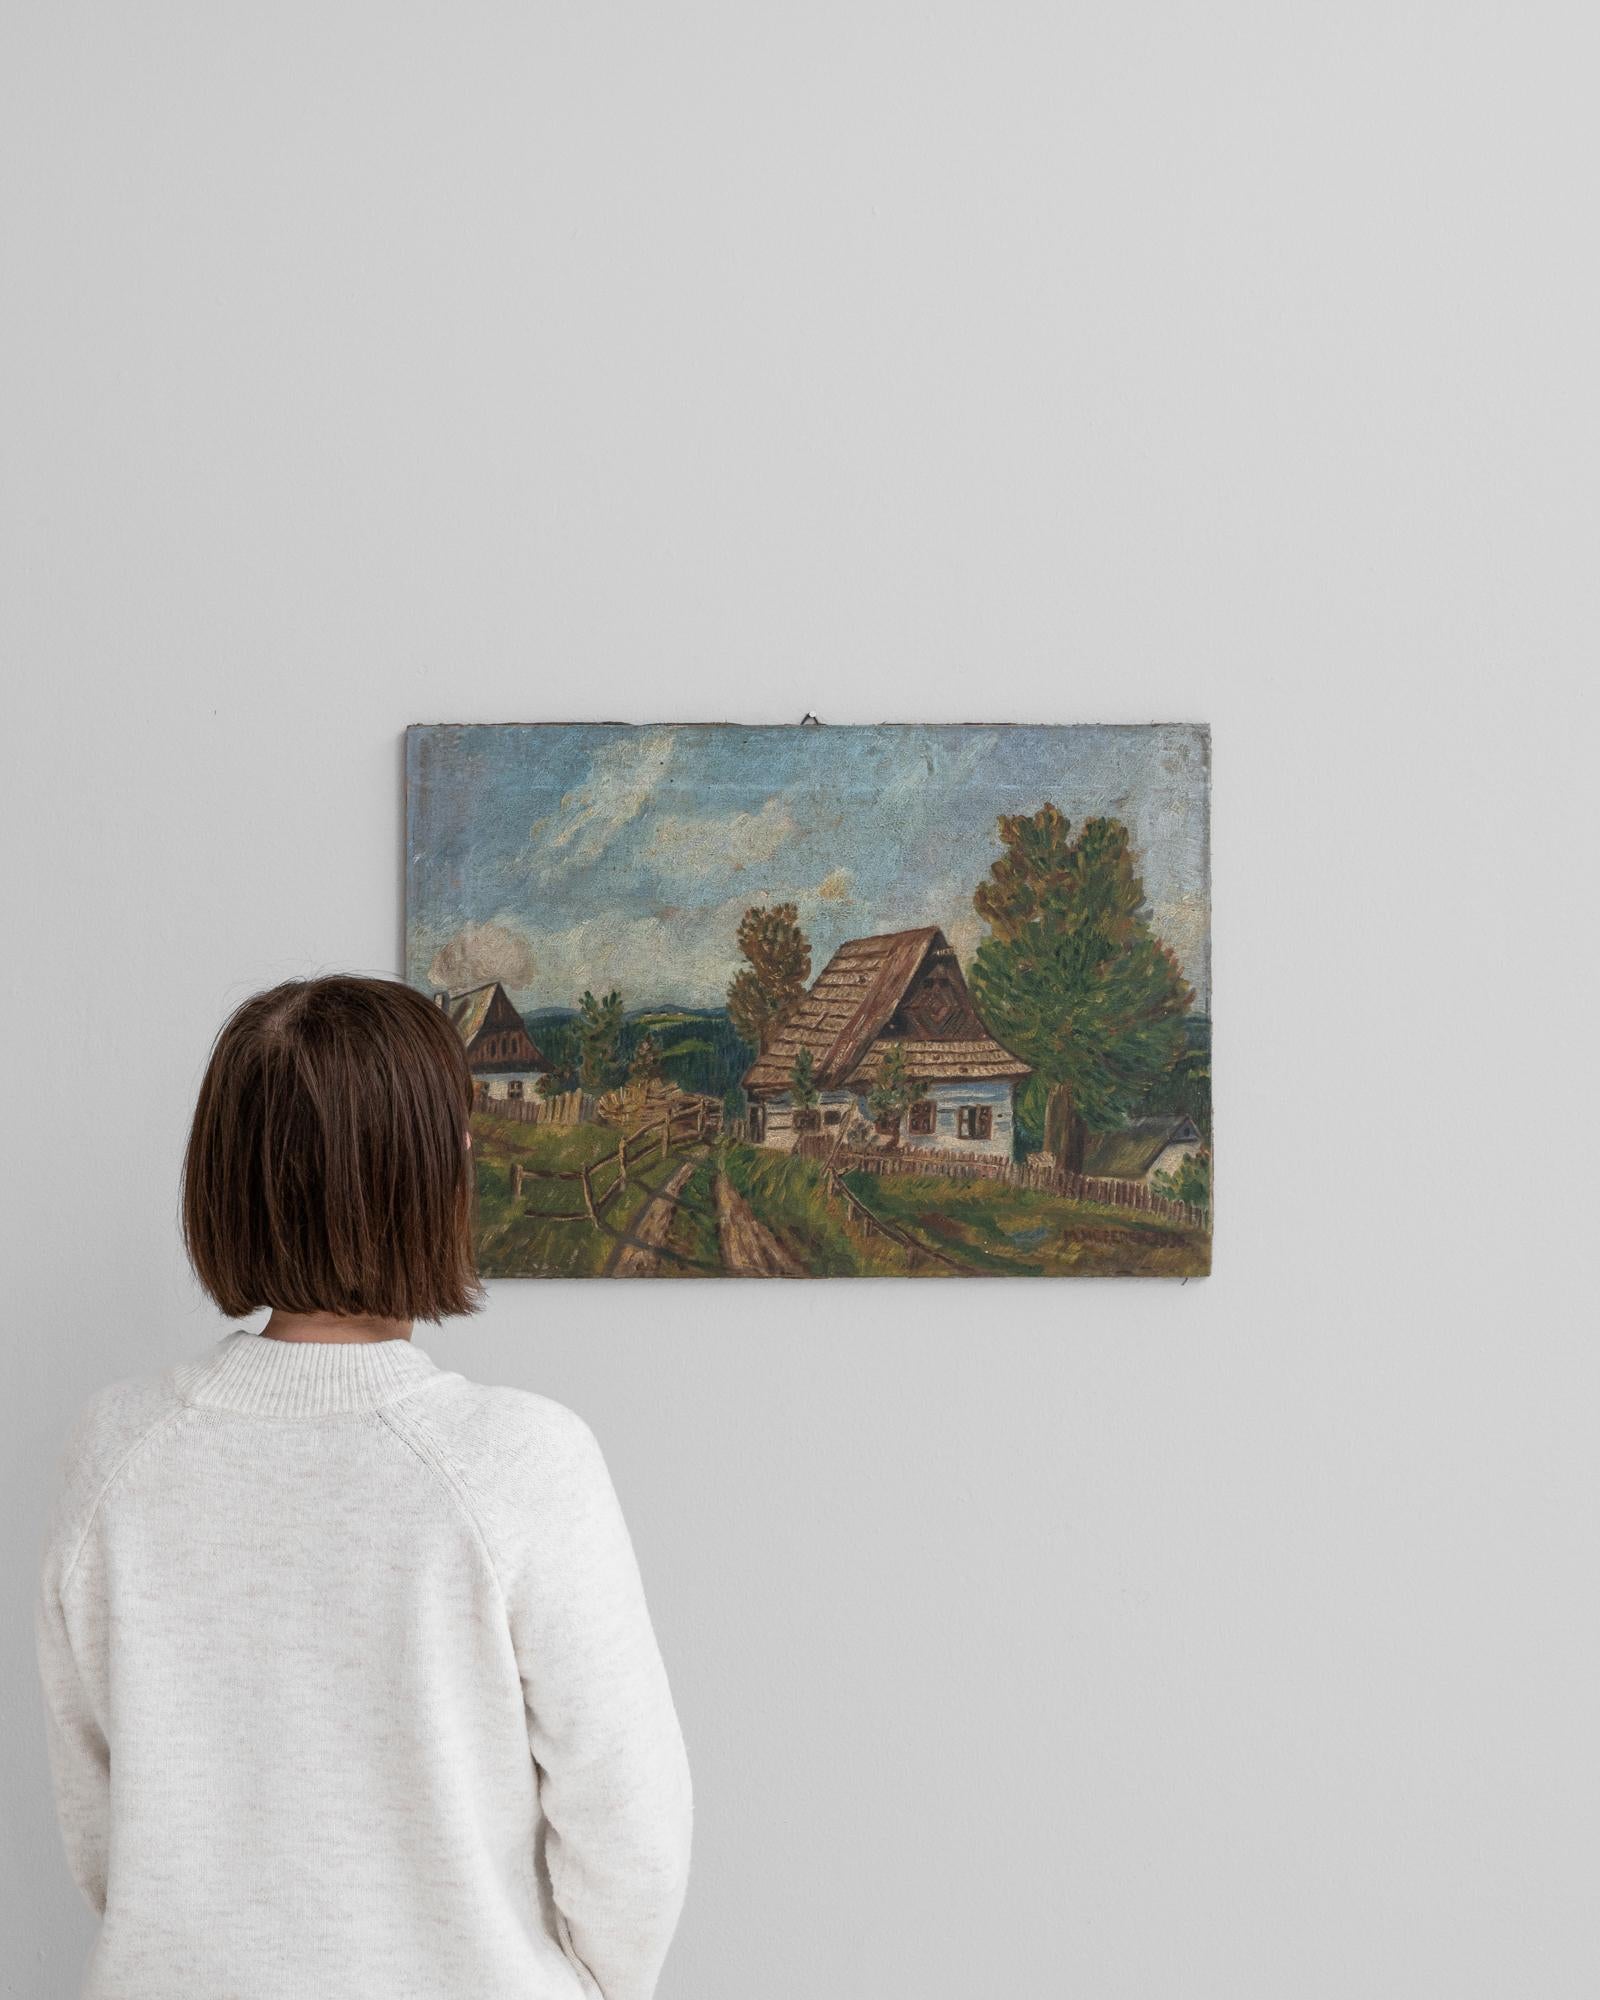 Discover the rustic charm of the Belgian countryside with this exquisite 1930s painting. Capturing the serene beauty of rural life, this artwork features quaint farmhouses nestled among lush, verdant fields under a sweeping sky. The vivid